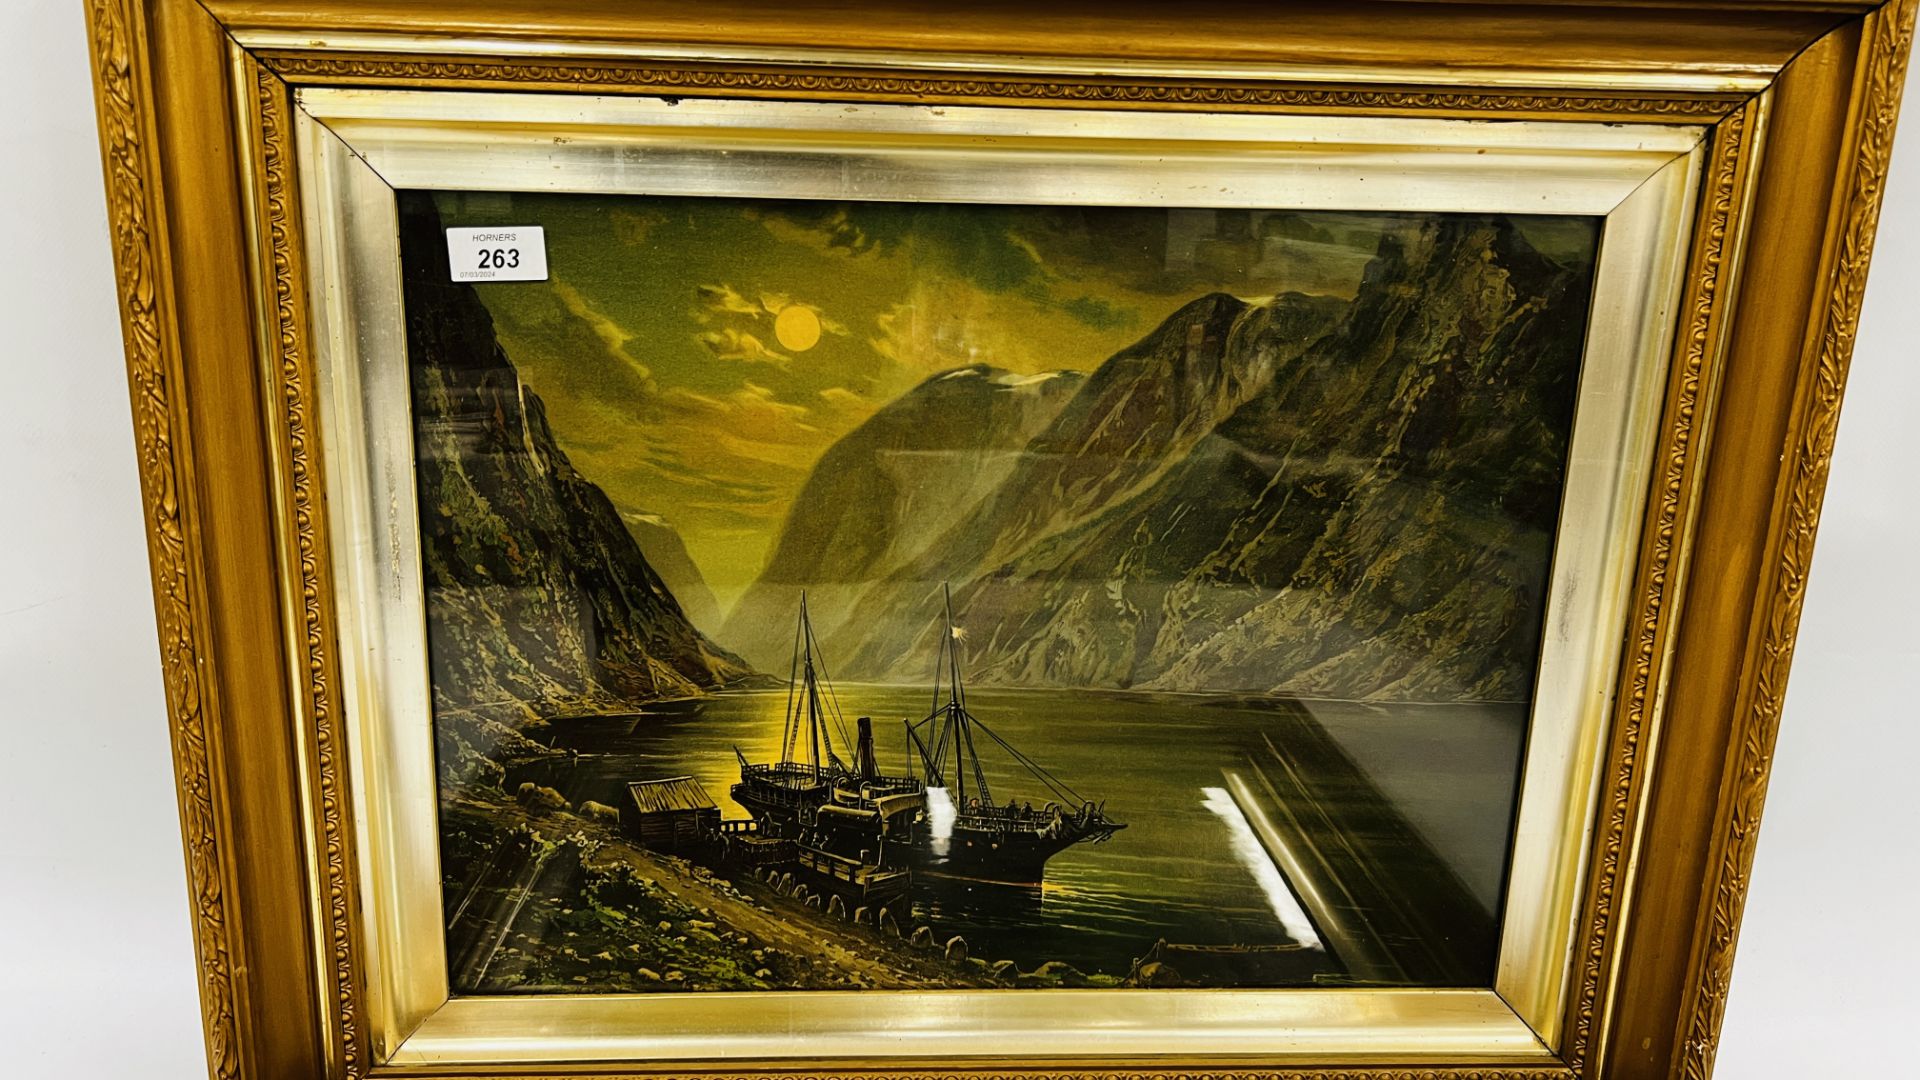 A PAIR OF ORNATE GILT FRAMED PRINTS DEPICTING CONTINENTAL SEA SCAPES. - Image 2 of 12